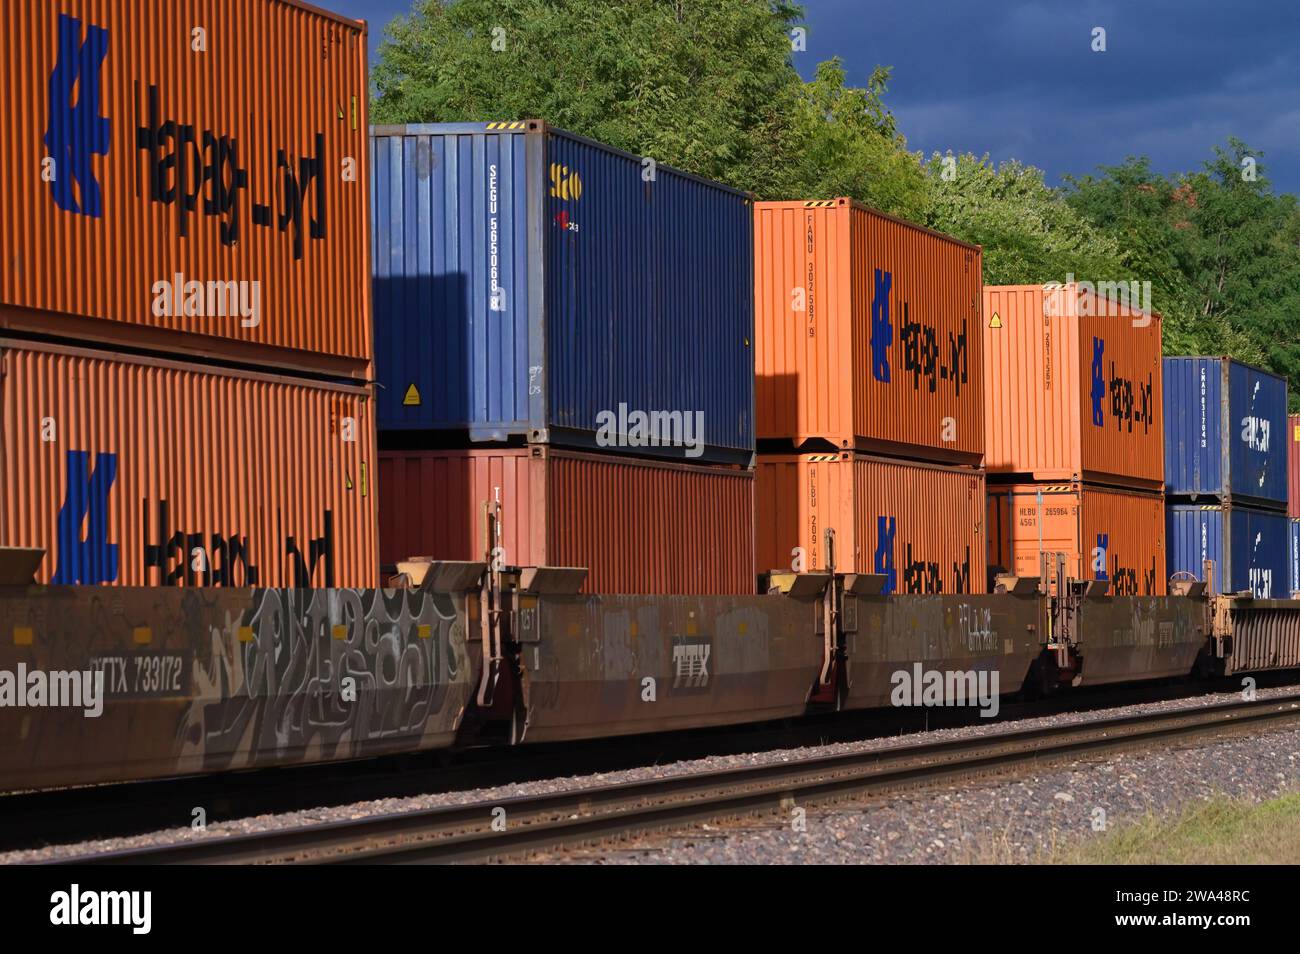 Glen Ellyn, Illinois, USA. The late afternoon sun illuminates the containers on a Union Pacific Railroad intermodal freight train destined for Chicago. Stock Photo